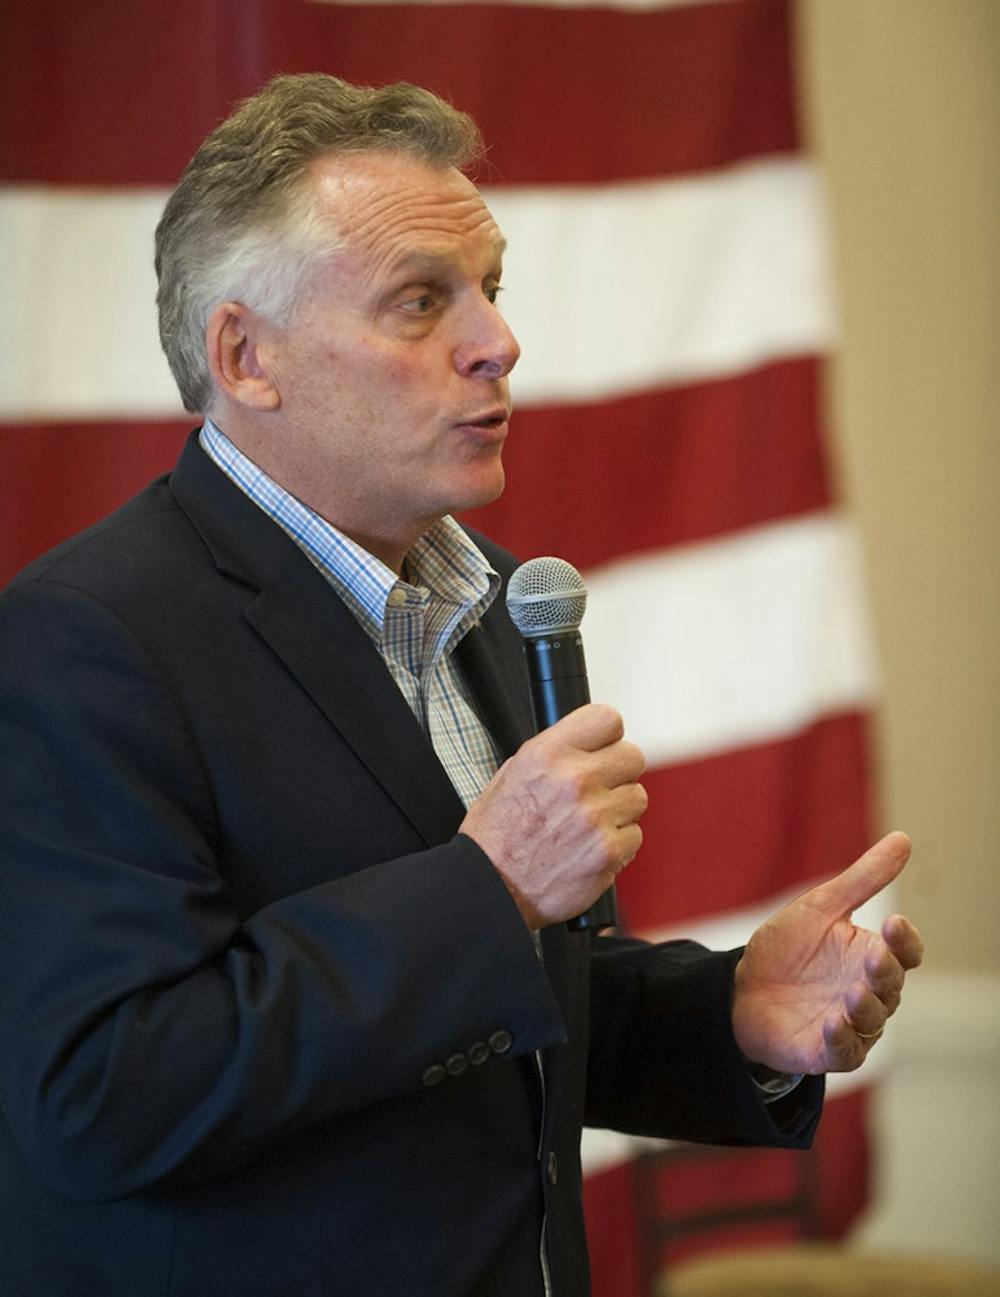 <p>McAuliffe campaign attorney Marc Elias said McAuliffe will cooperate with federal investigators should the governor be contacted.</p>